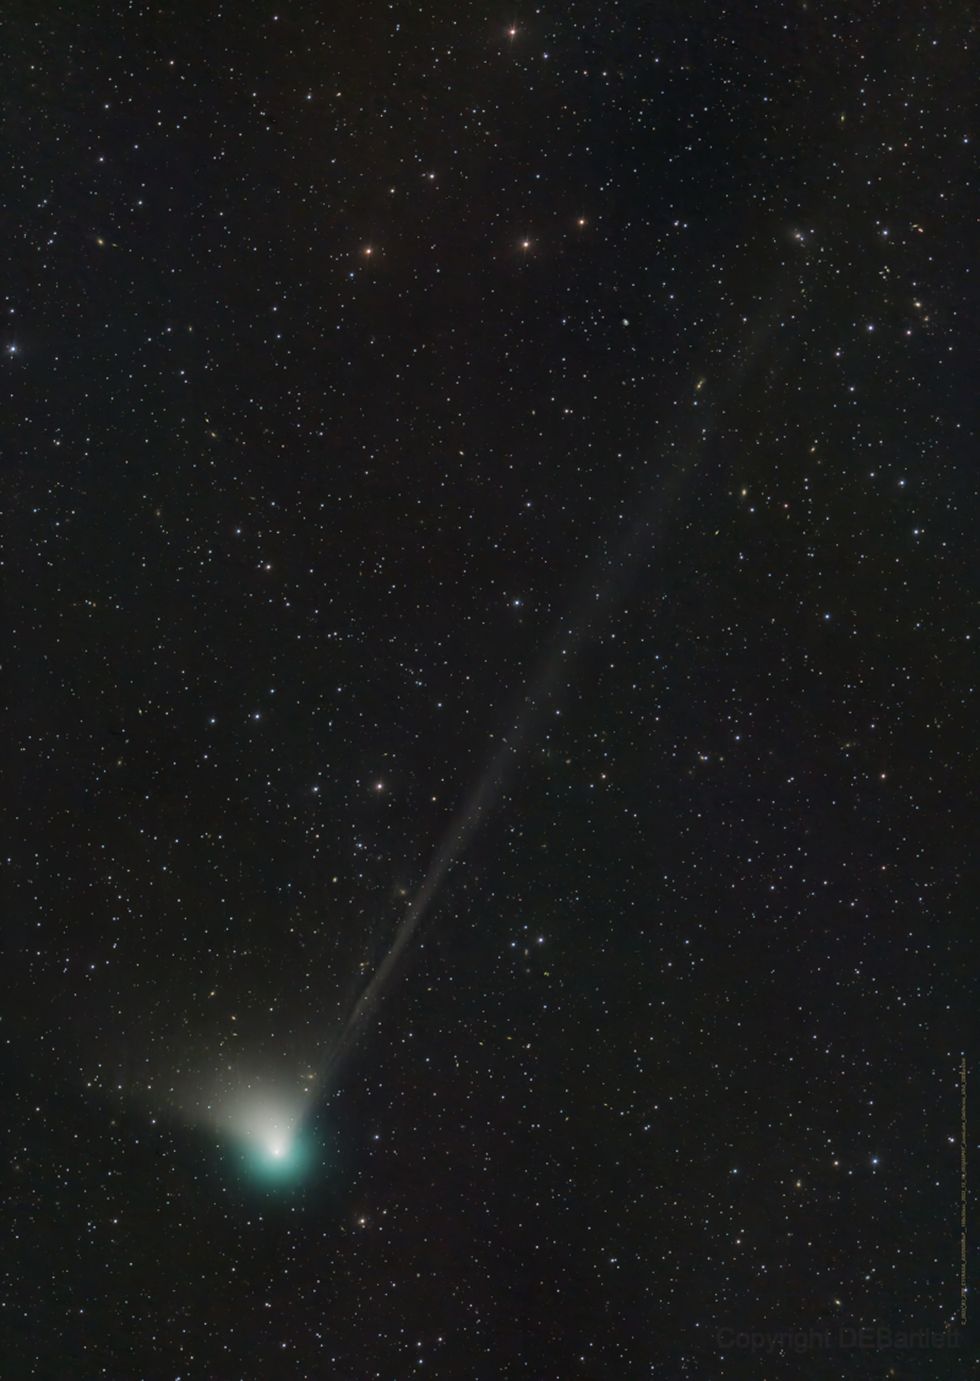 Green comet making its closest approach to Earth in 50,000 years